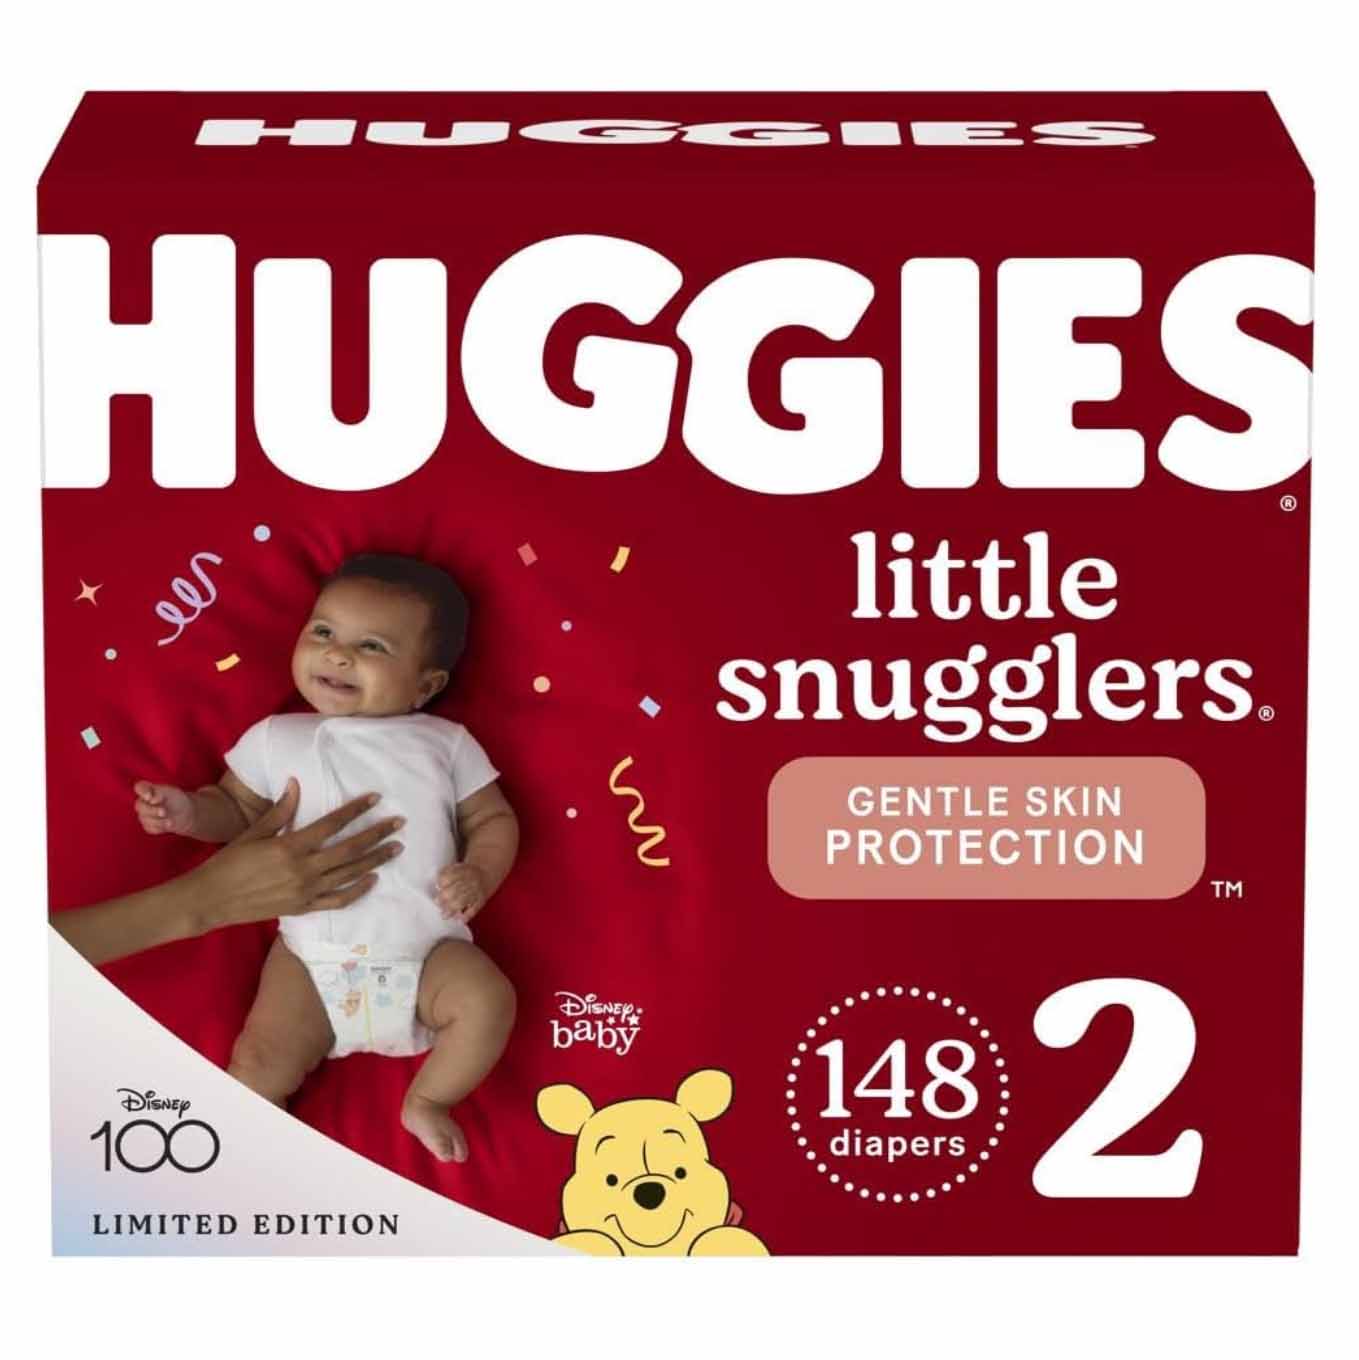 Diapers in red box packaging